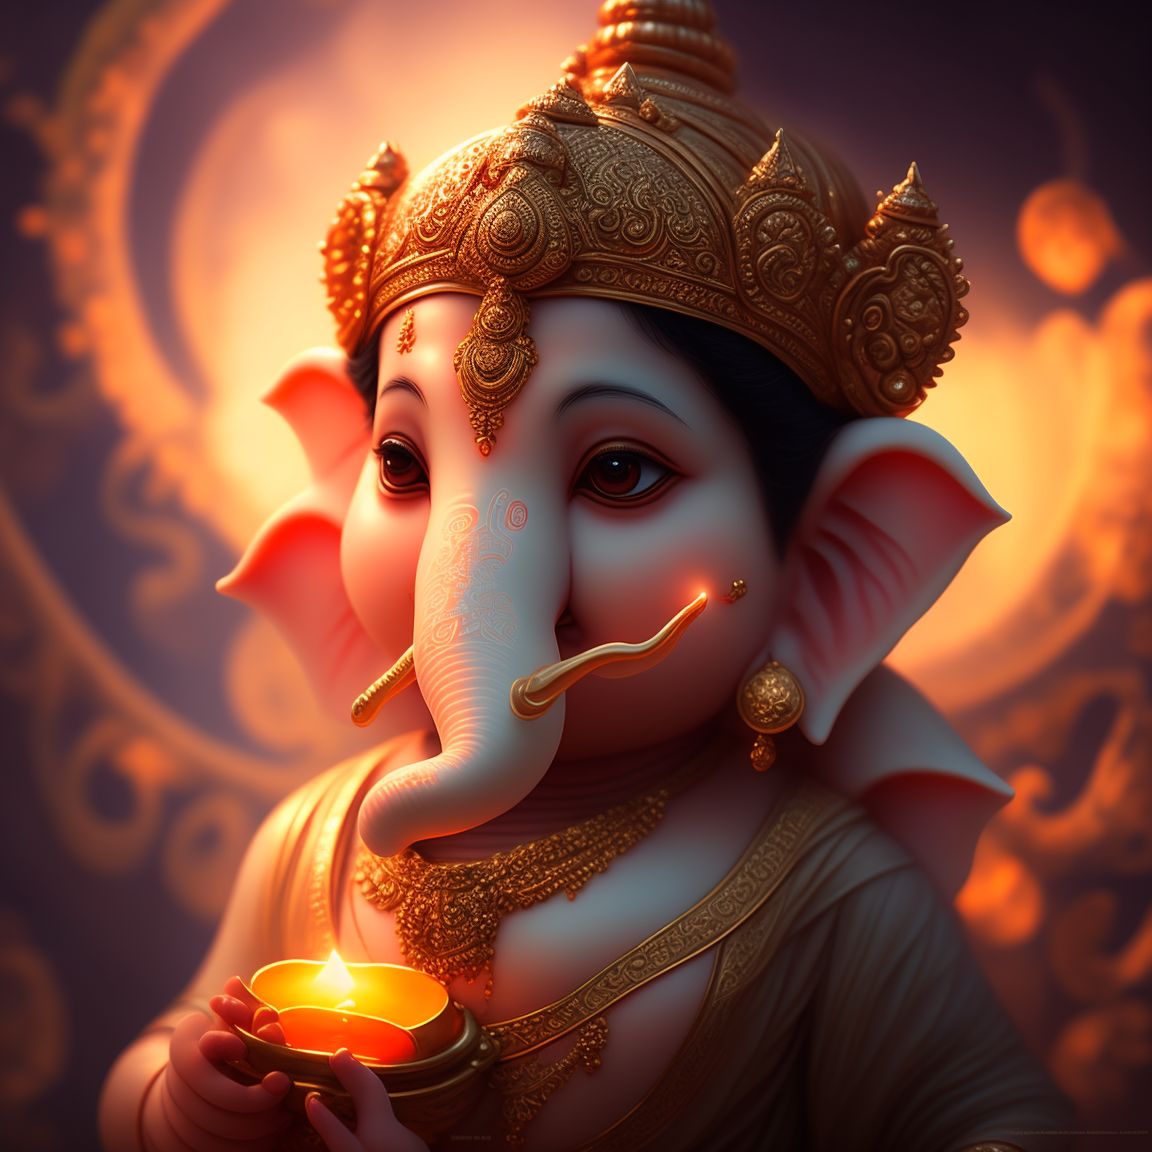 nutty-turtle988: Baby Lord Ganesh